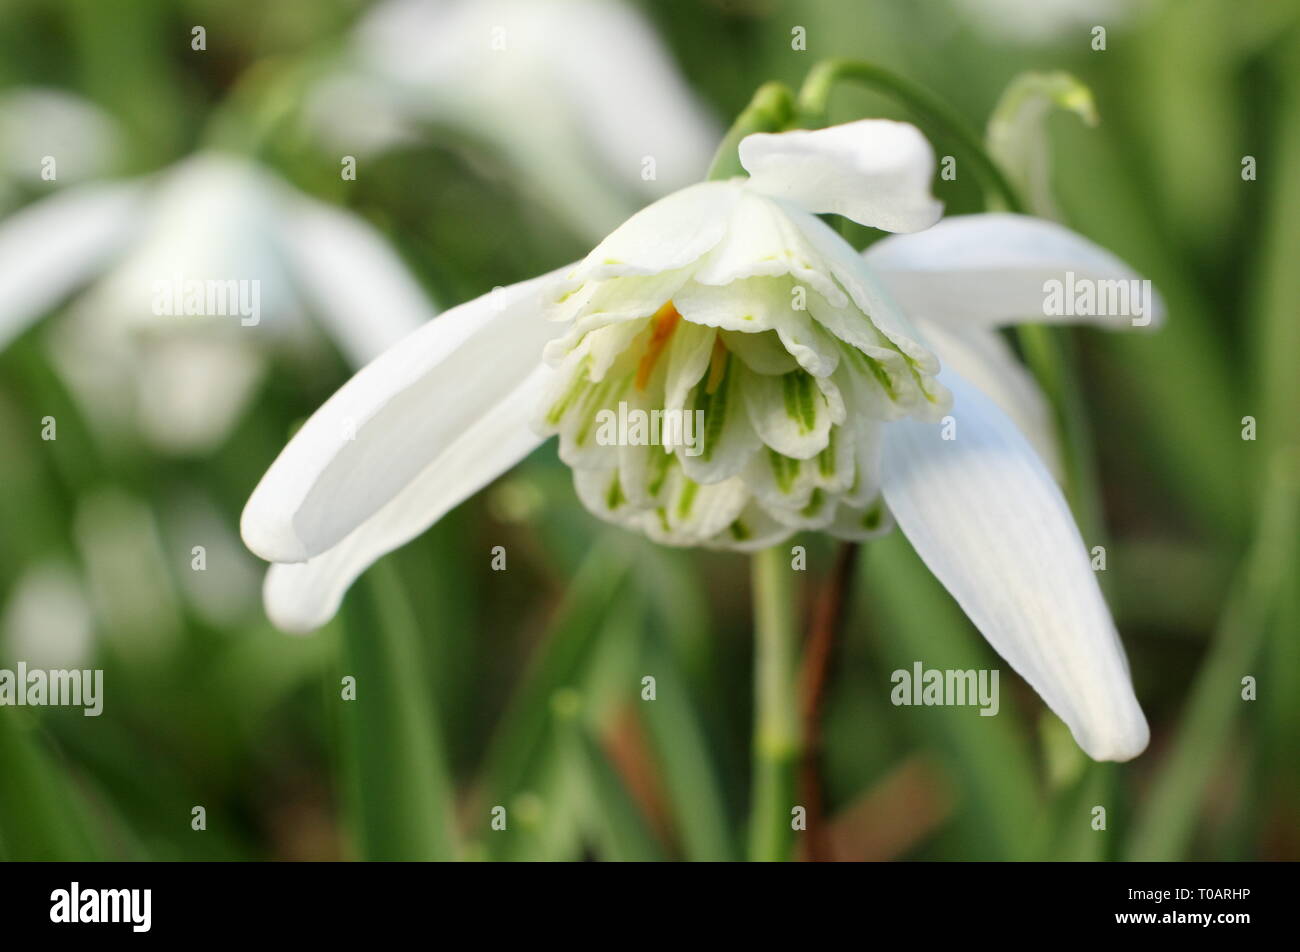 Galanthus 'Lady Beatrix Stanley'. Double blooms of snowdrop 'Lady Beatrix Stanley' showing characteristic green dots on outer petals - February, UK Stock Photo